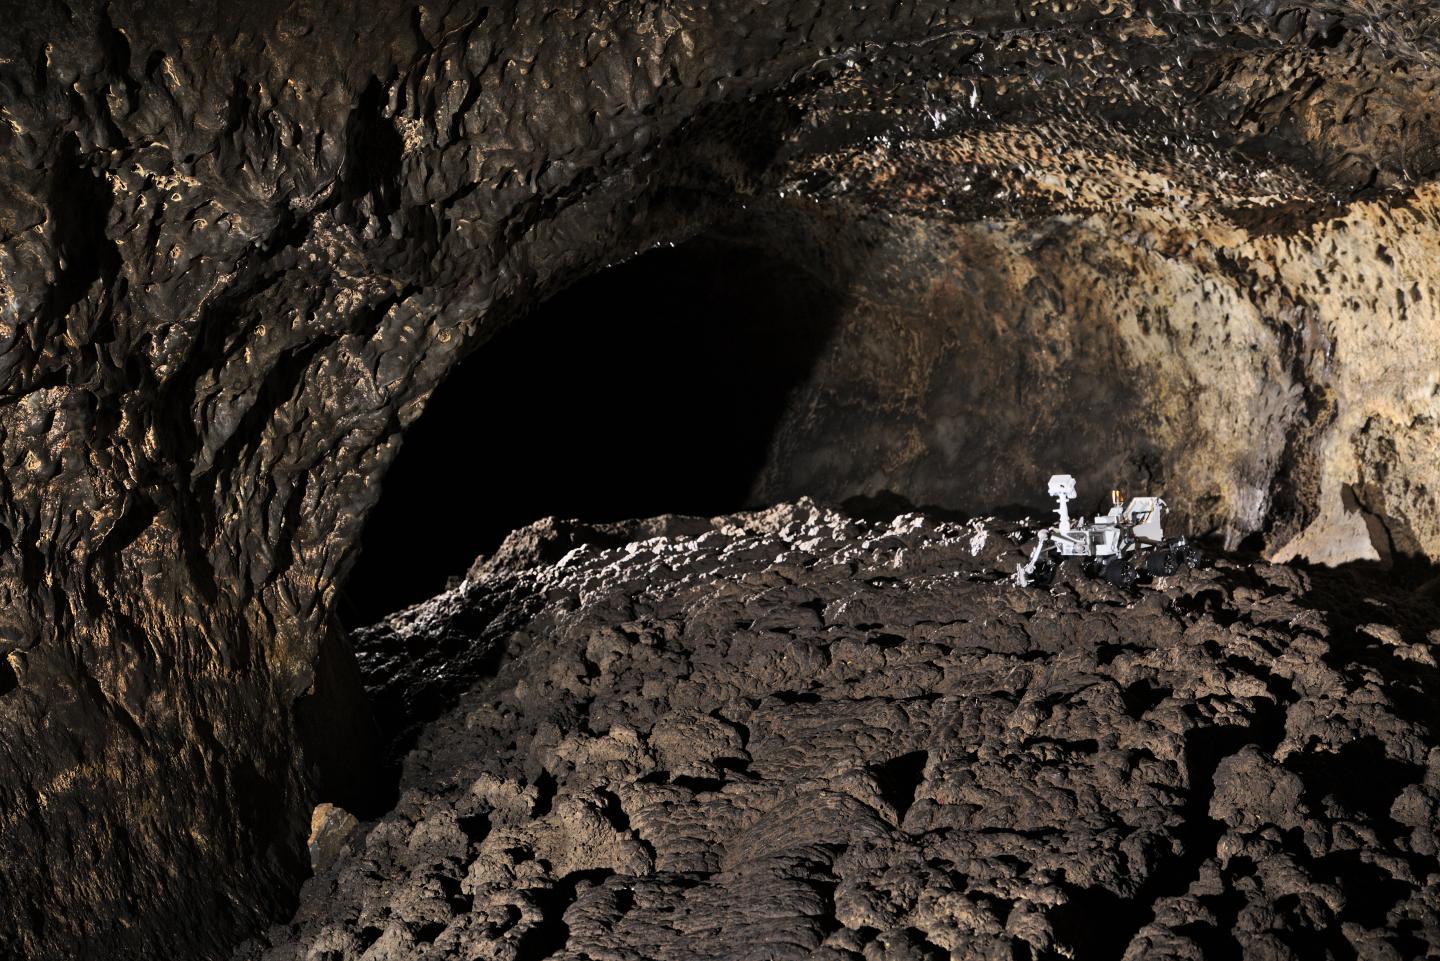 Researchers Are Using a Four-Wheeled Rover to Explore Accessibility inside Caves